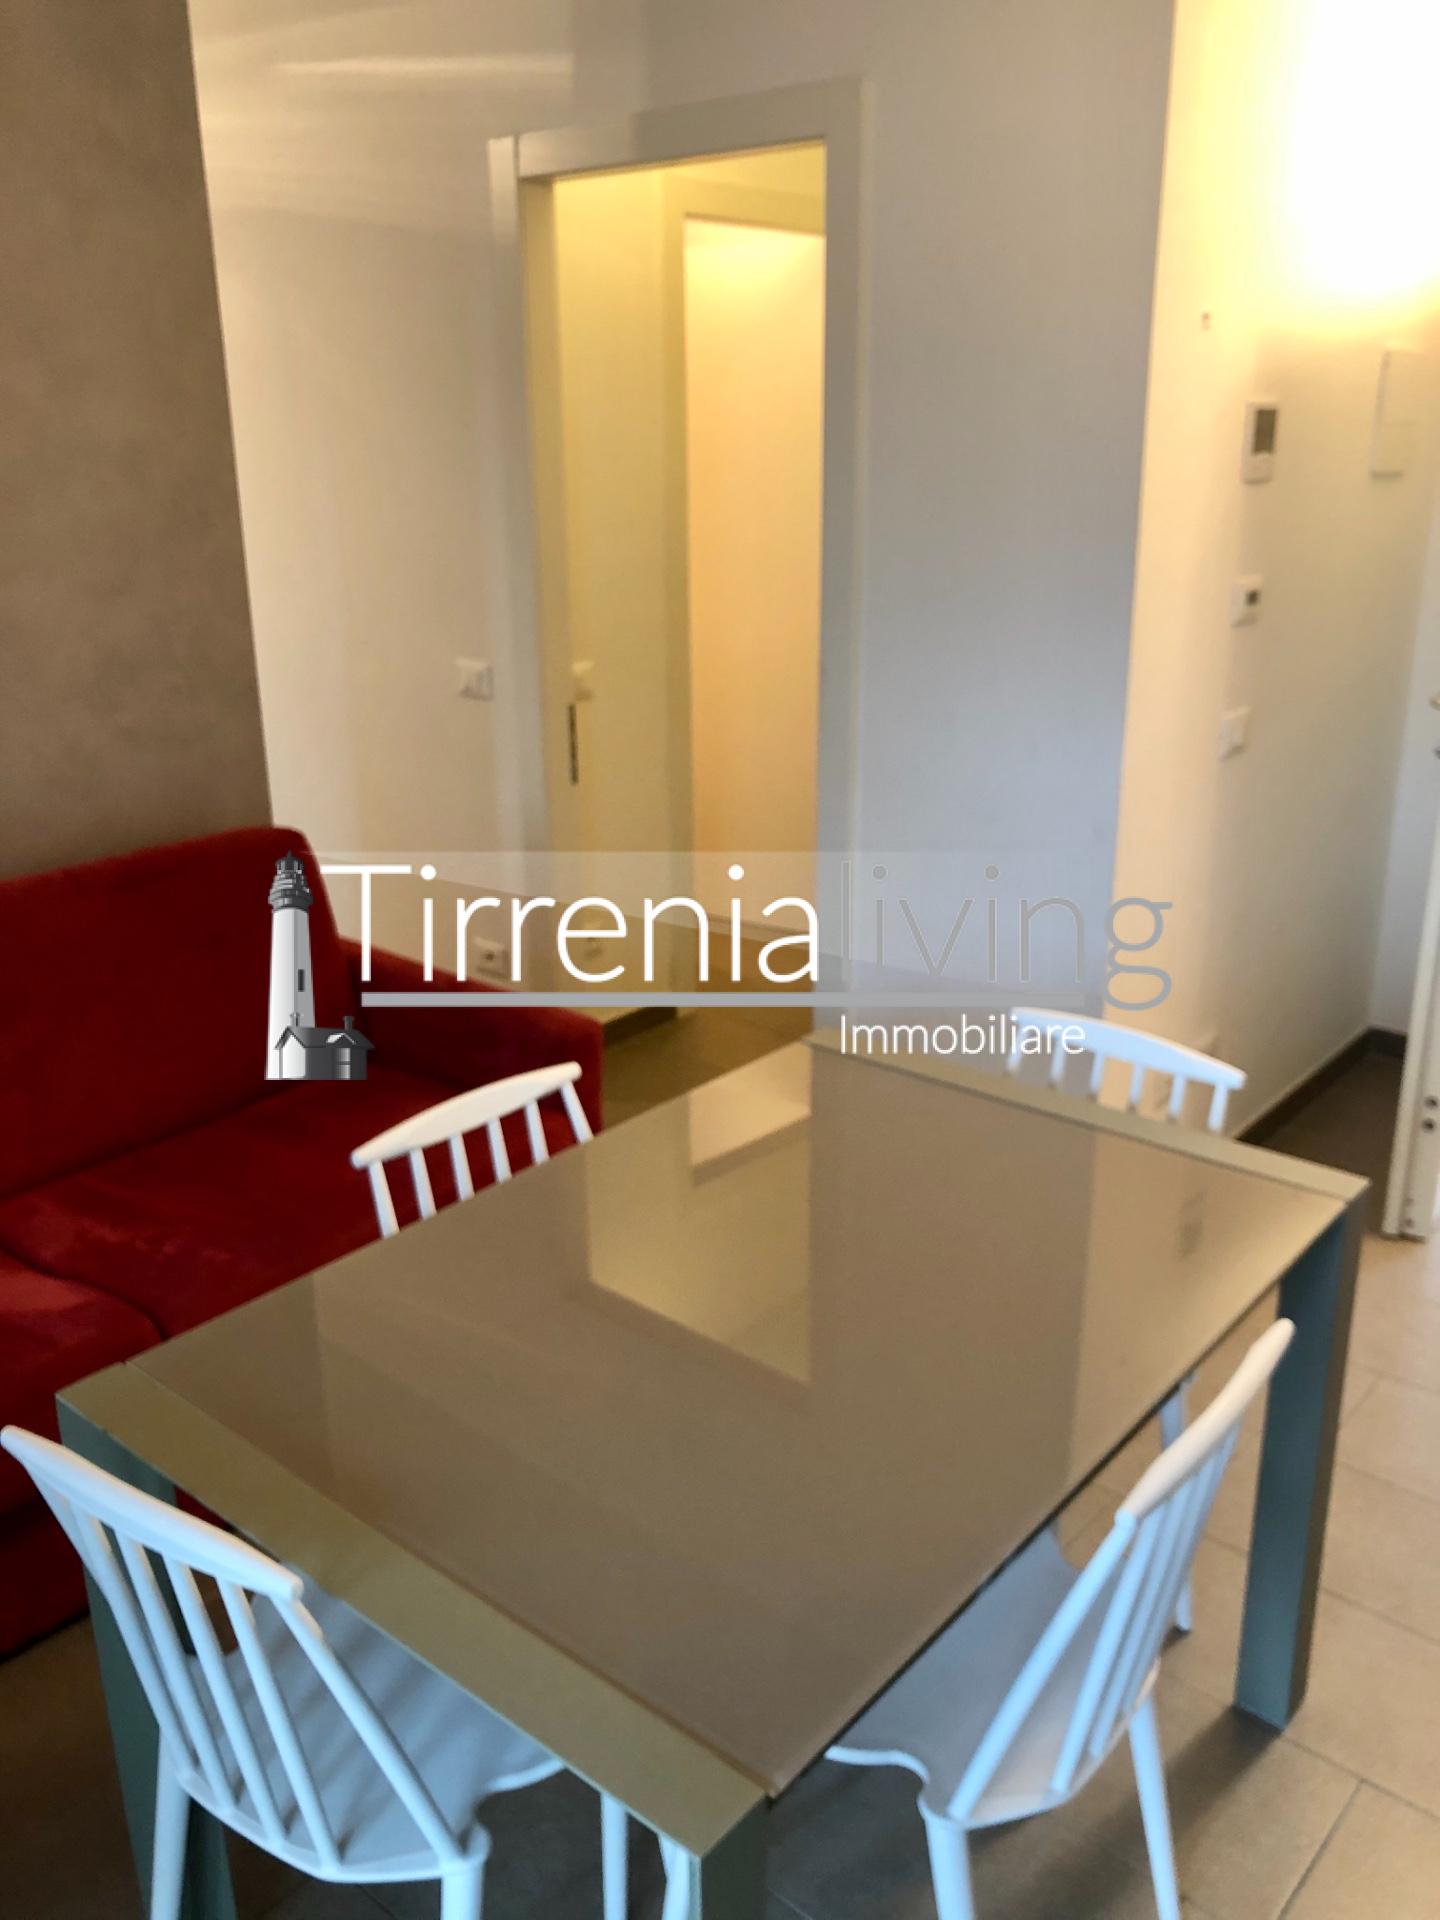 Apartment for rent, ref. A-480